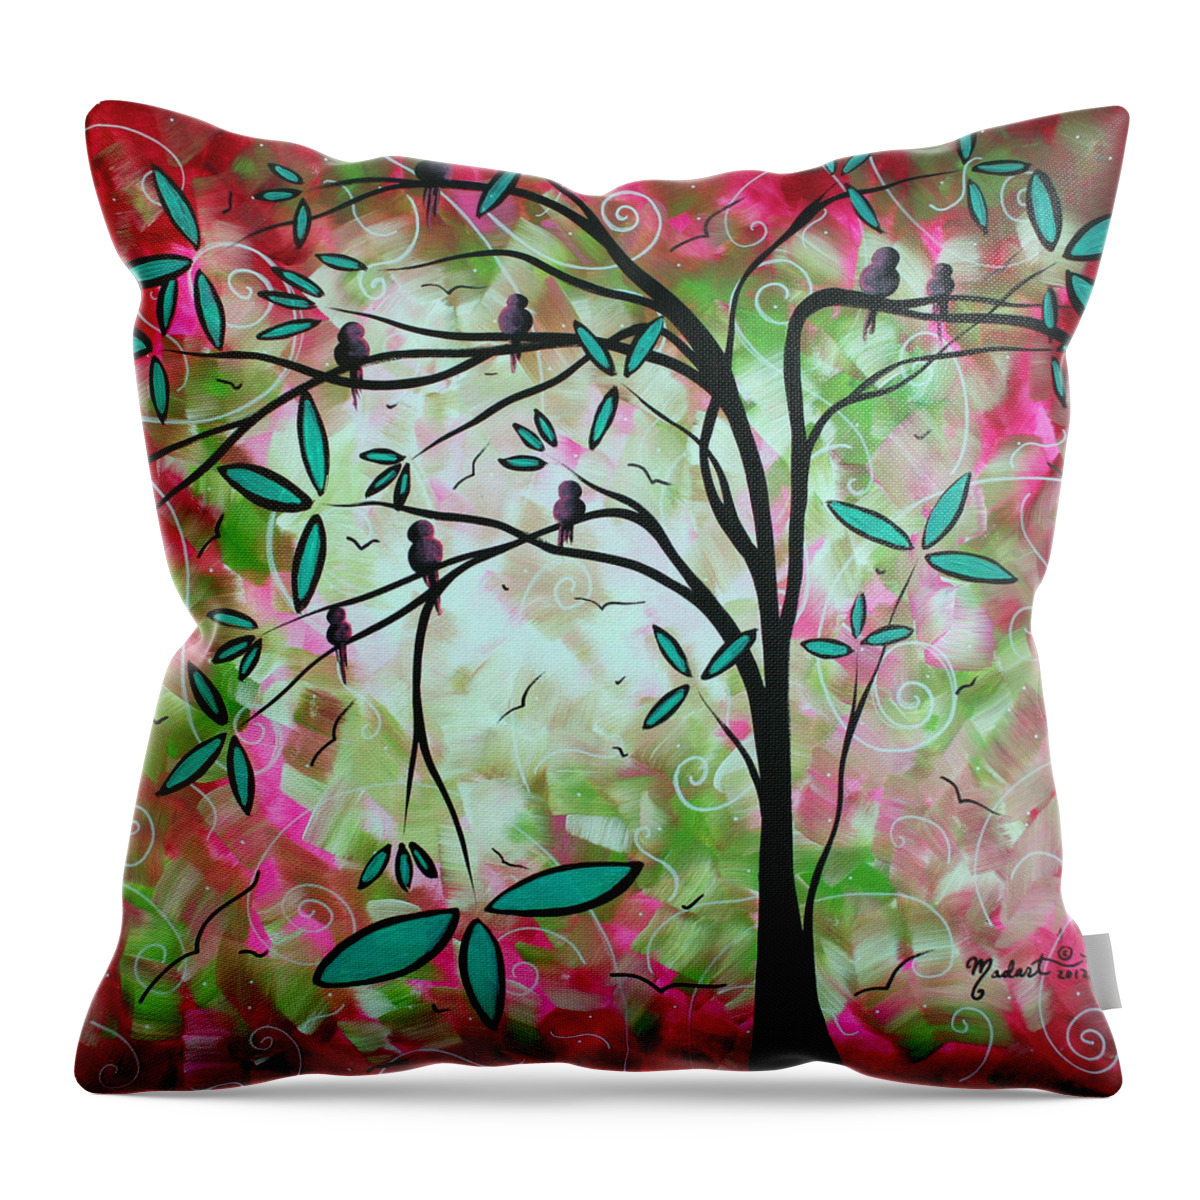 Whimsical Throw Pillow featuring the painting Abstract Art Original Whimsical Magical Bird Painting THROUGH THE LOOKING GLASS by Megan Aroon